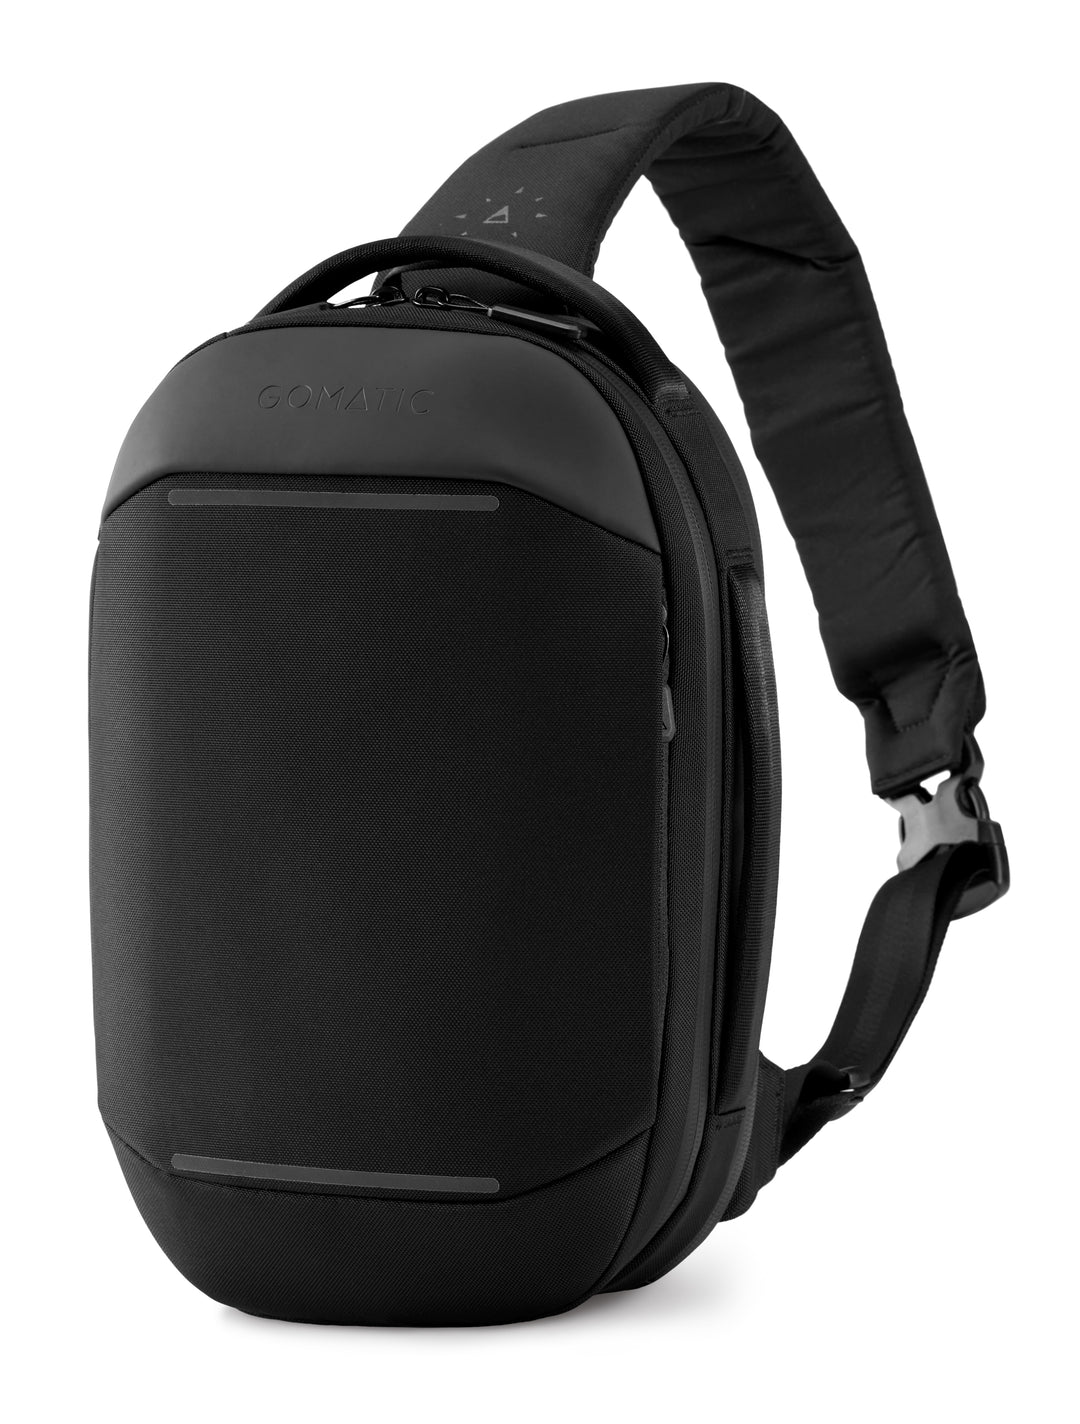 Navigator Sling 6L - GOMATIC Travel Bags and Packs